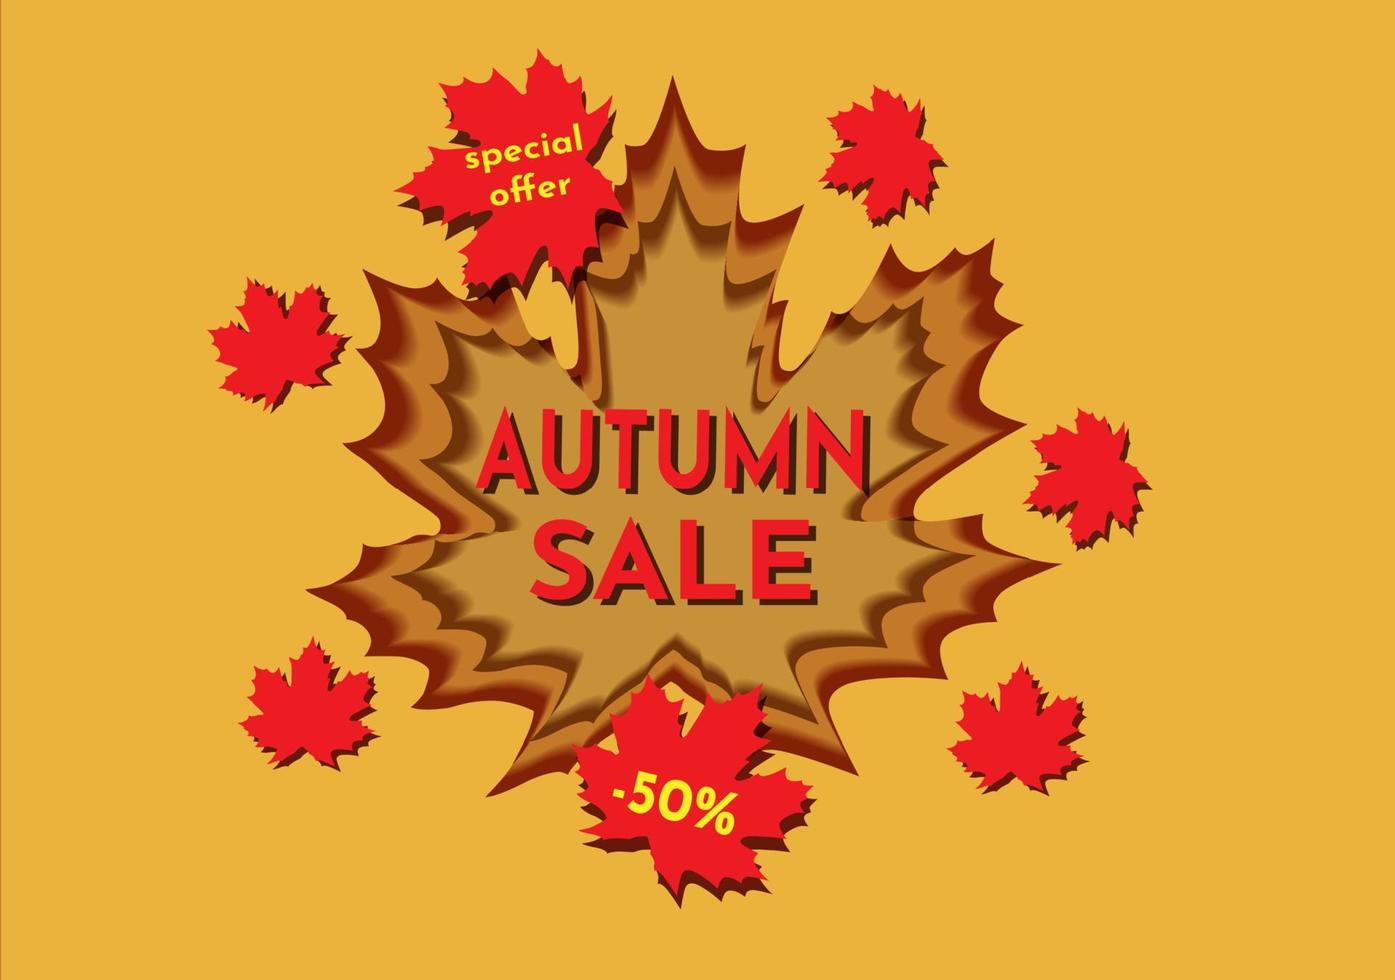 Autumn sale. Banners with autumn leaves. Backgrounds with autumn foliage. An advertising poster, a social media post, a discount card or a flyer design template. Vector illustration.